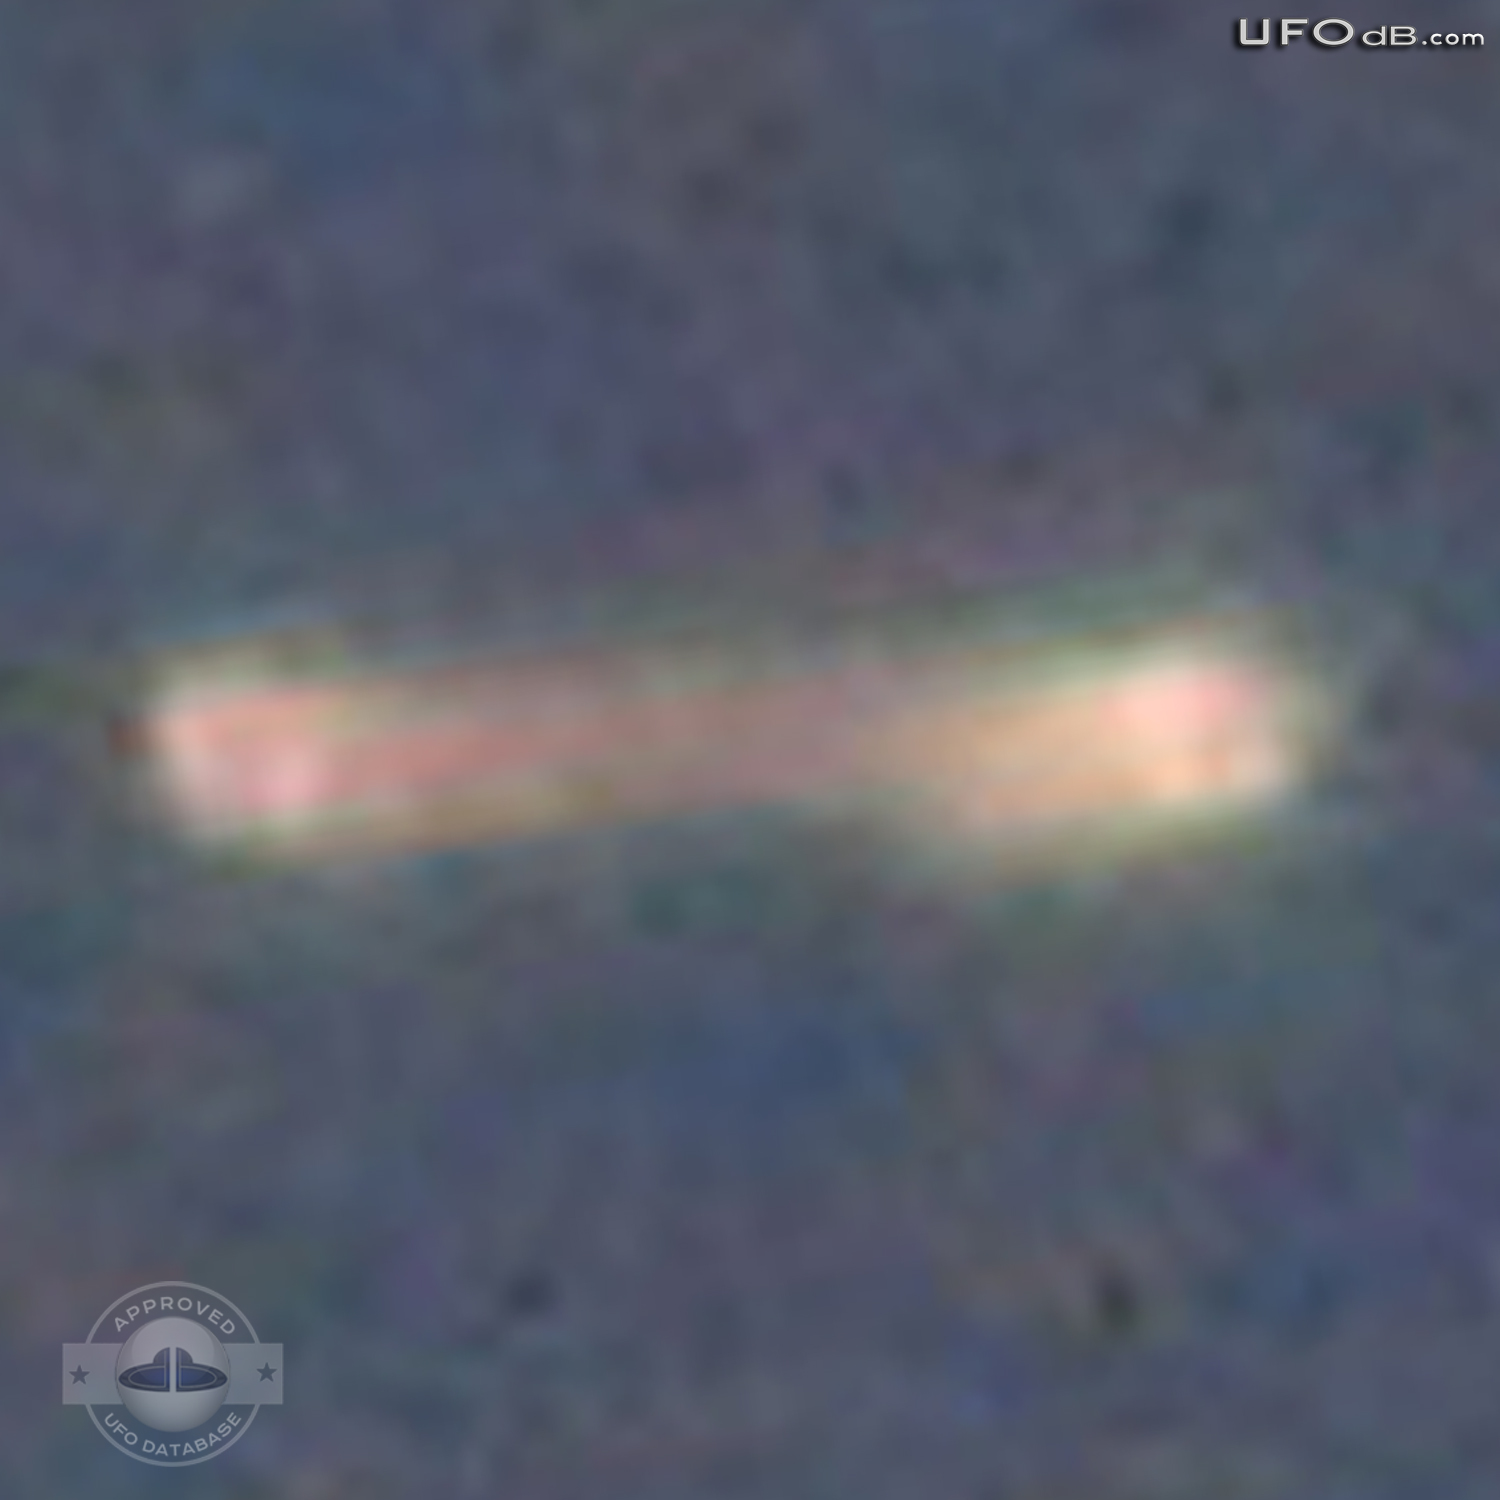 Changing Luminance UFO caught on picture | Katy, Texas | April 6 2011 UFO Picture #306-5